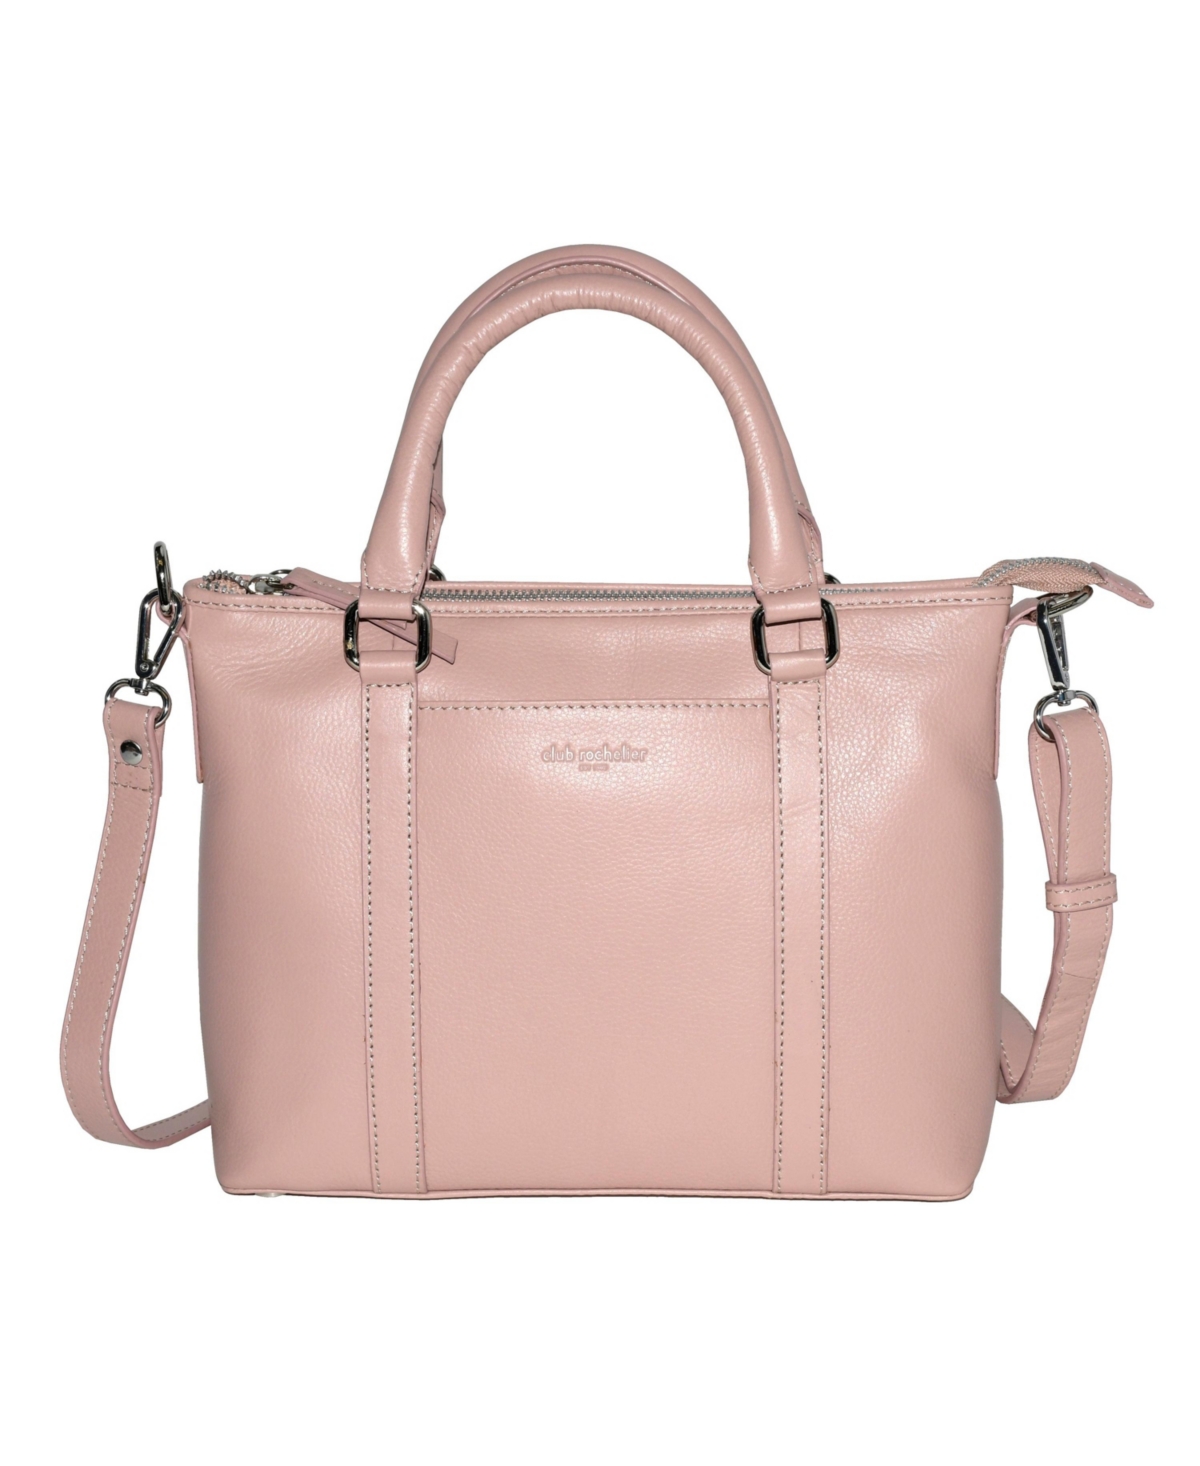 Leather Crossbody Bag with Top Handles - Blush